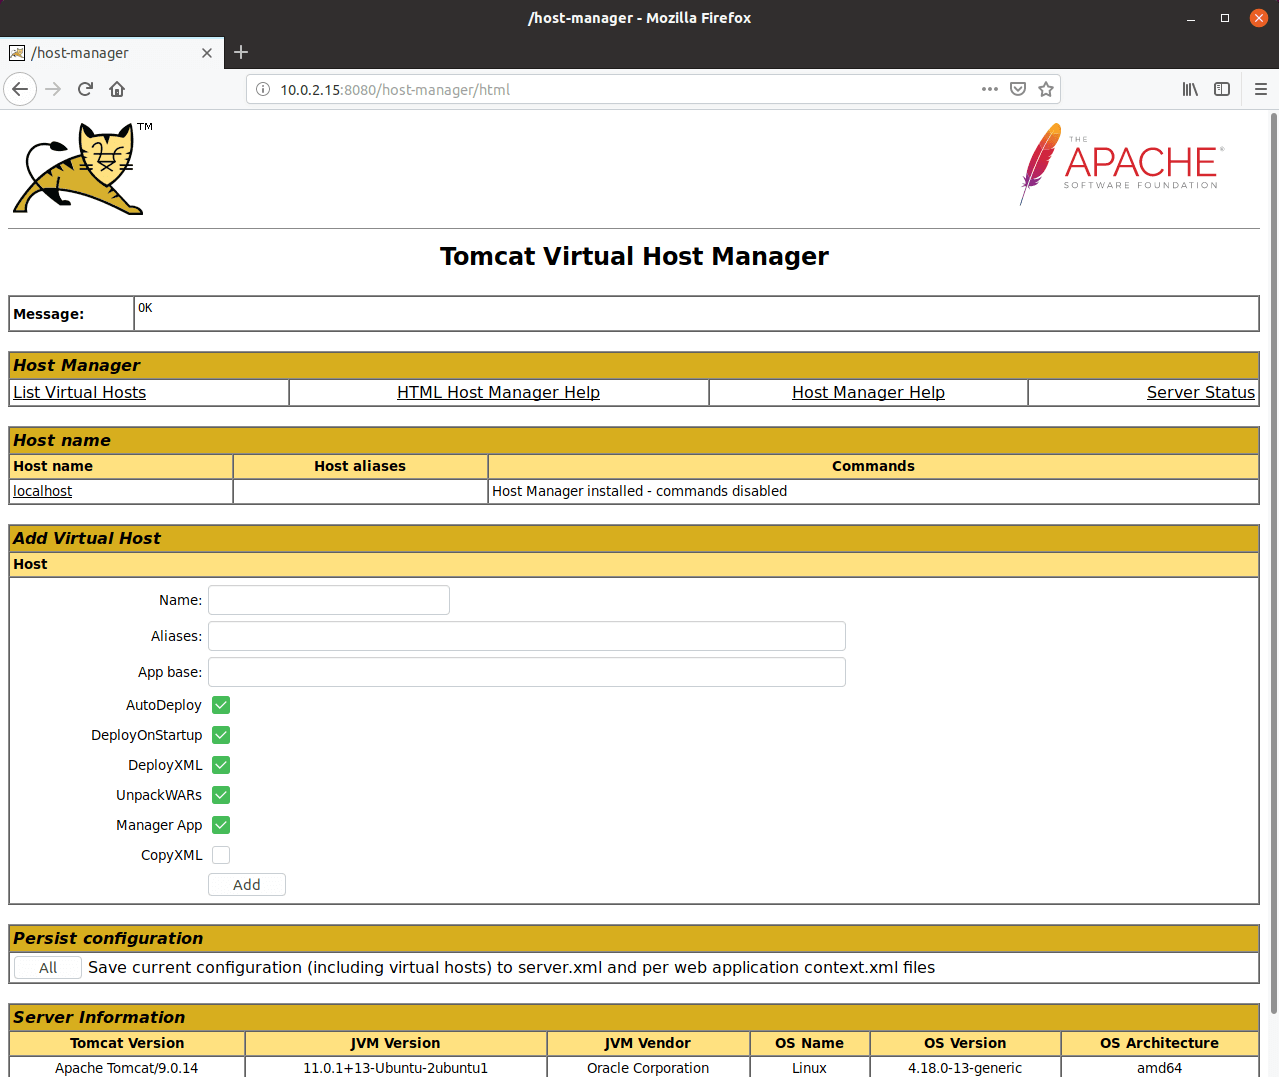 Access Apache Tomcat Virtual Host Manager